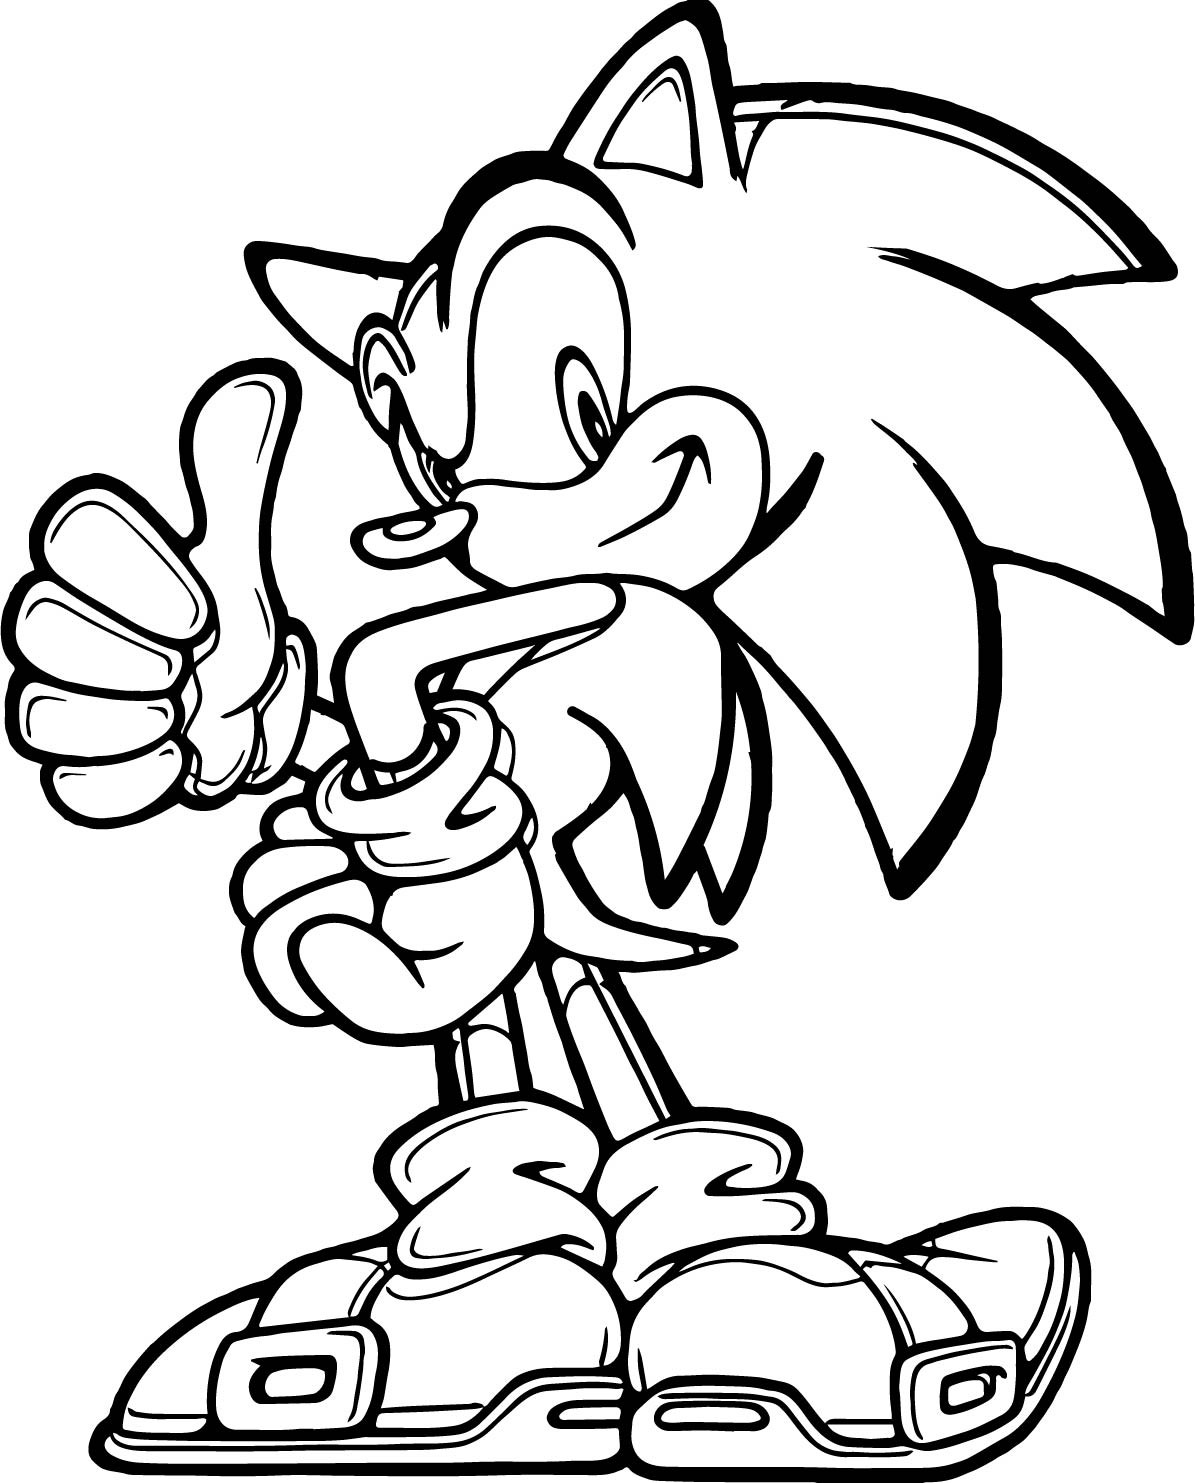 Silver The Hedgehog Drawing | Free download on ClipArtMag